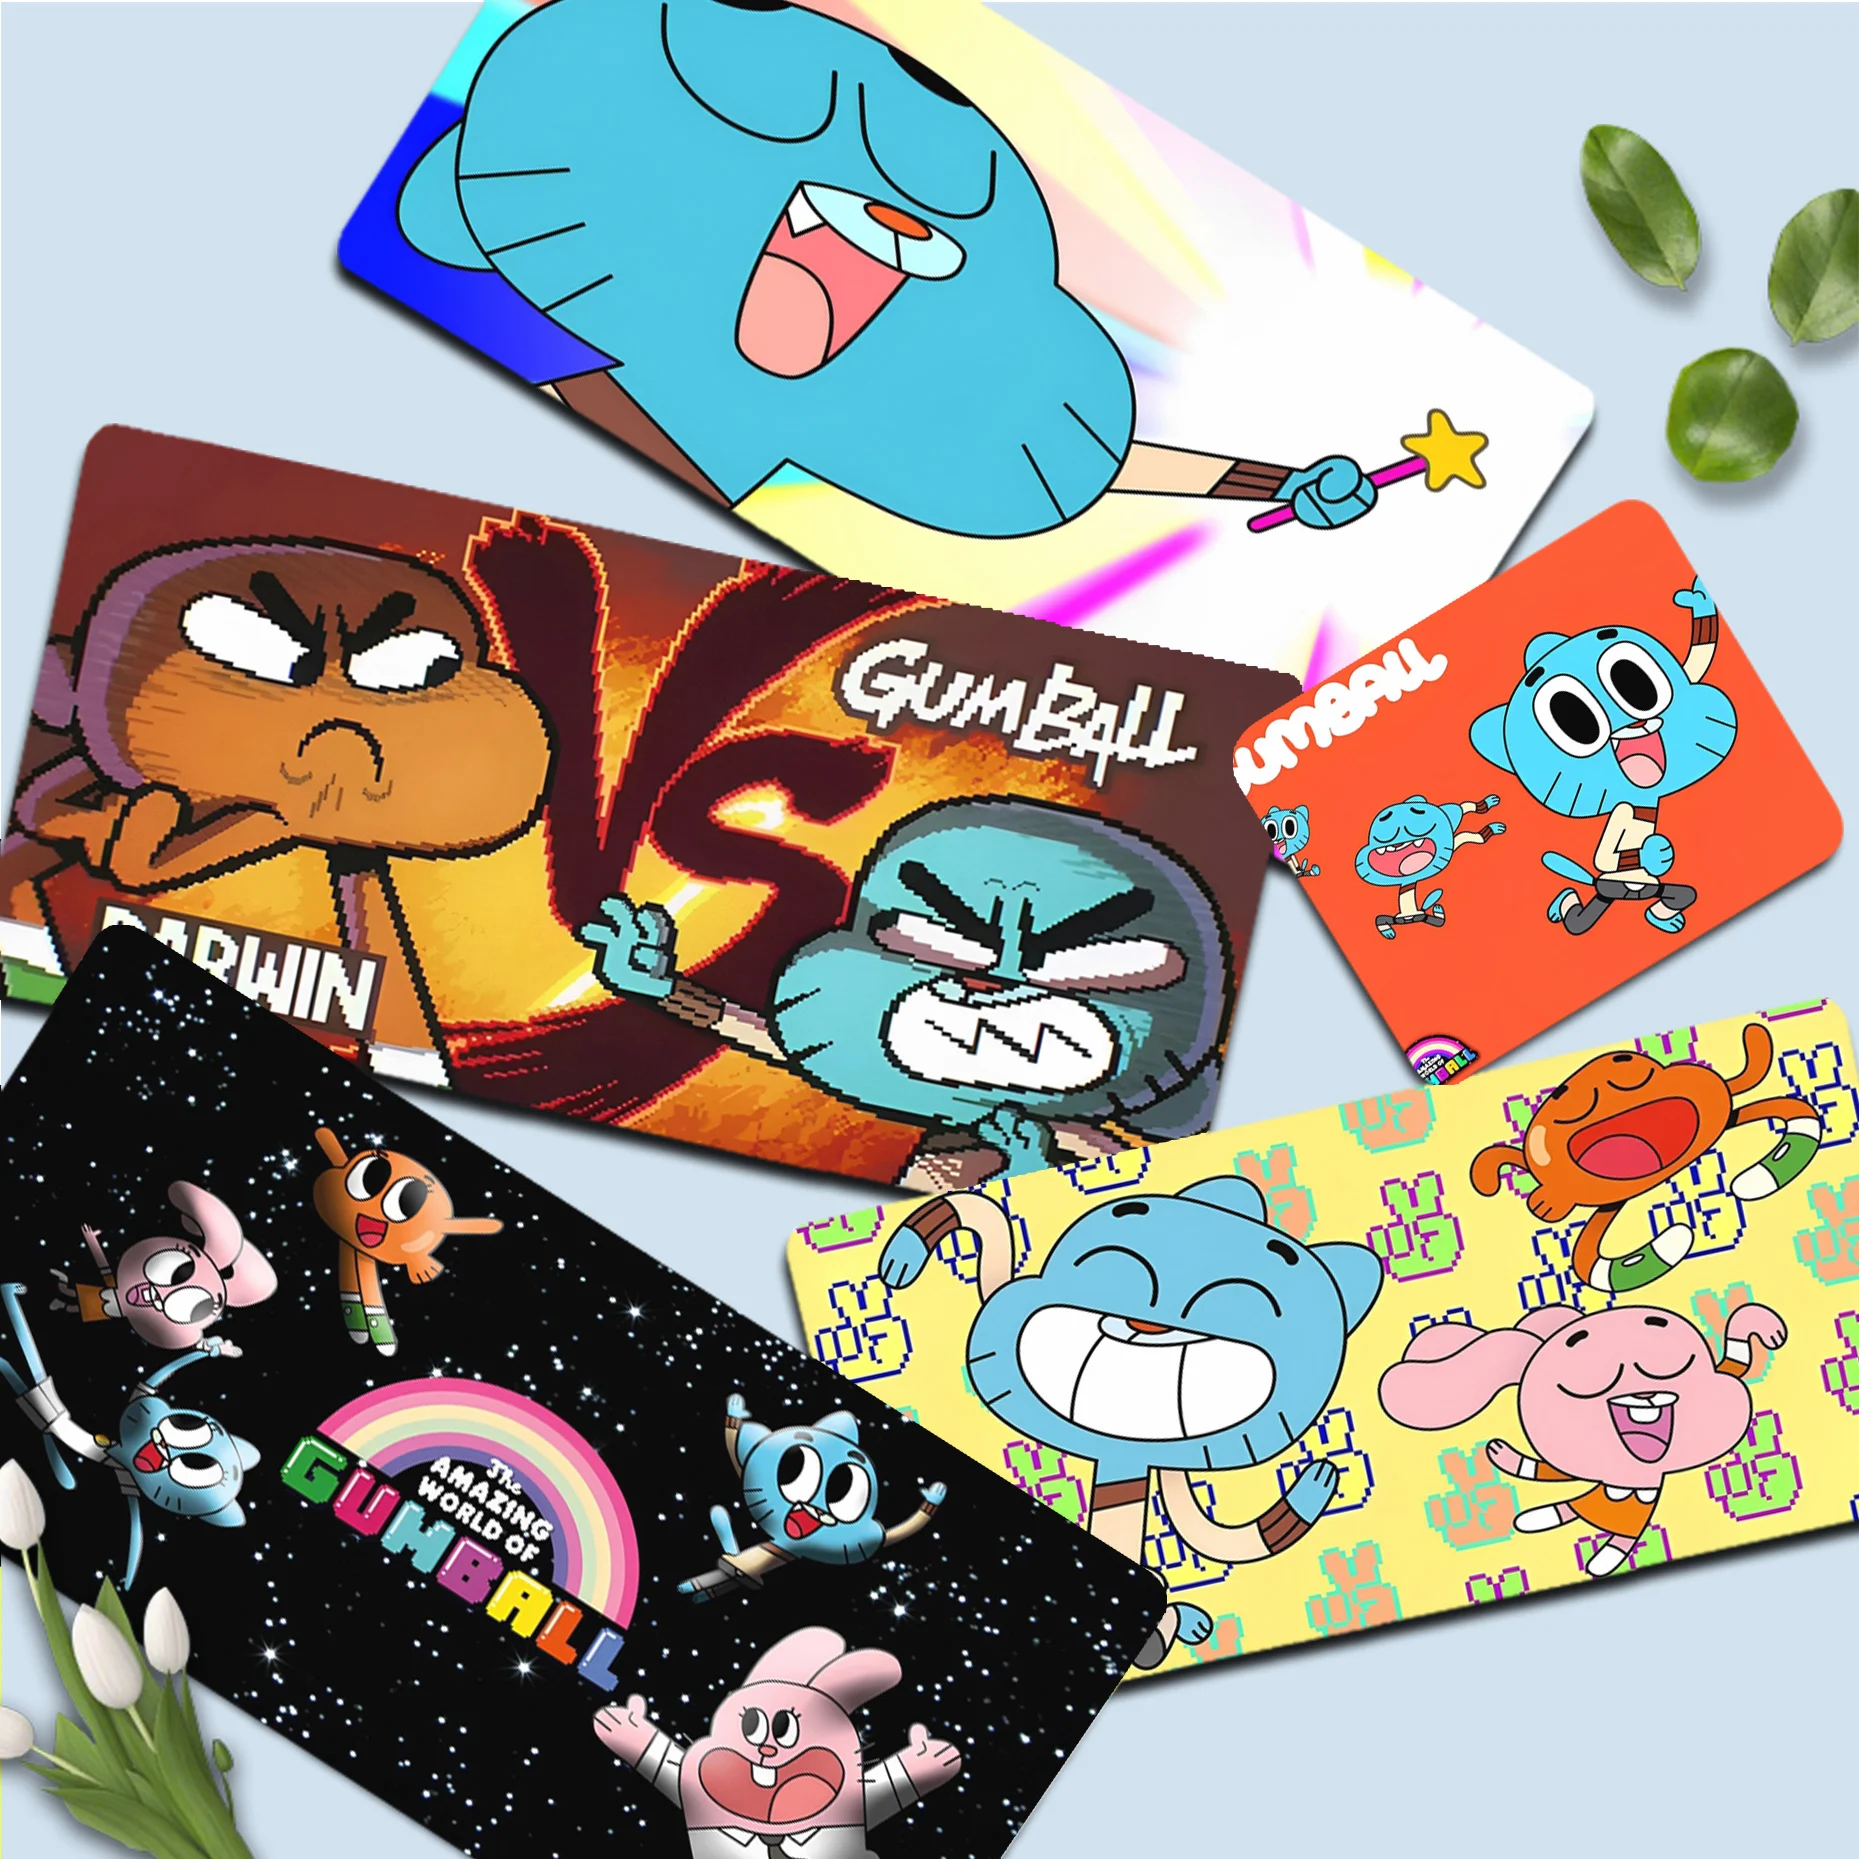 

The Amazing Funny W-world Of Gumball Mousepad High Quality gamer play mats Mousepad Size for Game Keyboard Pad for Gamer